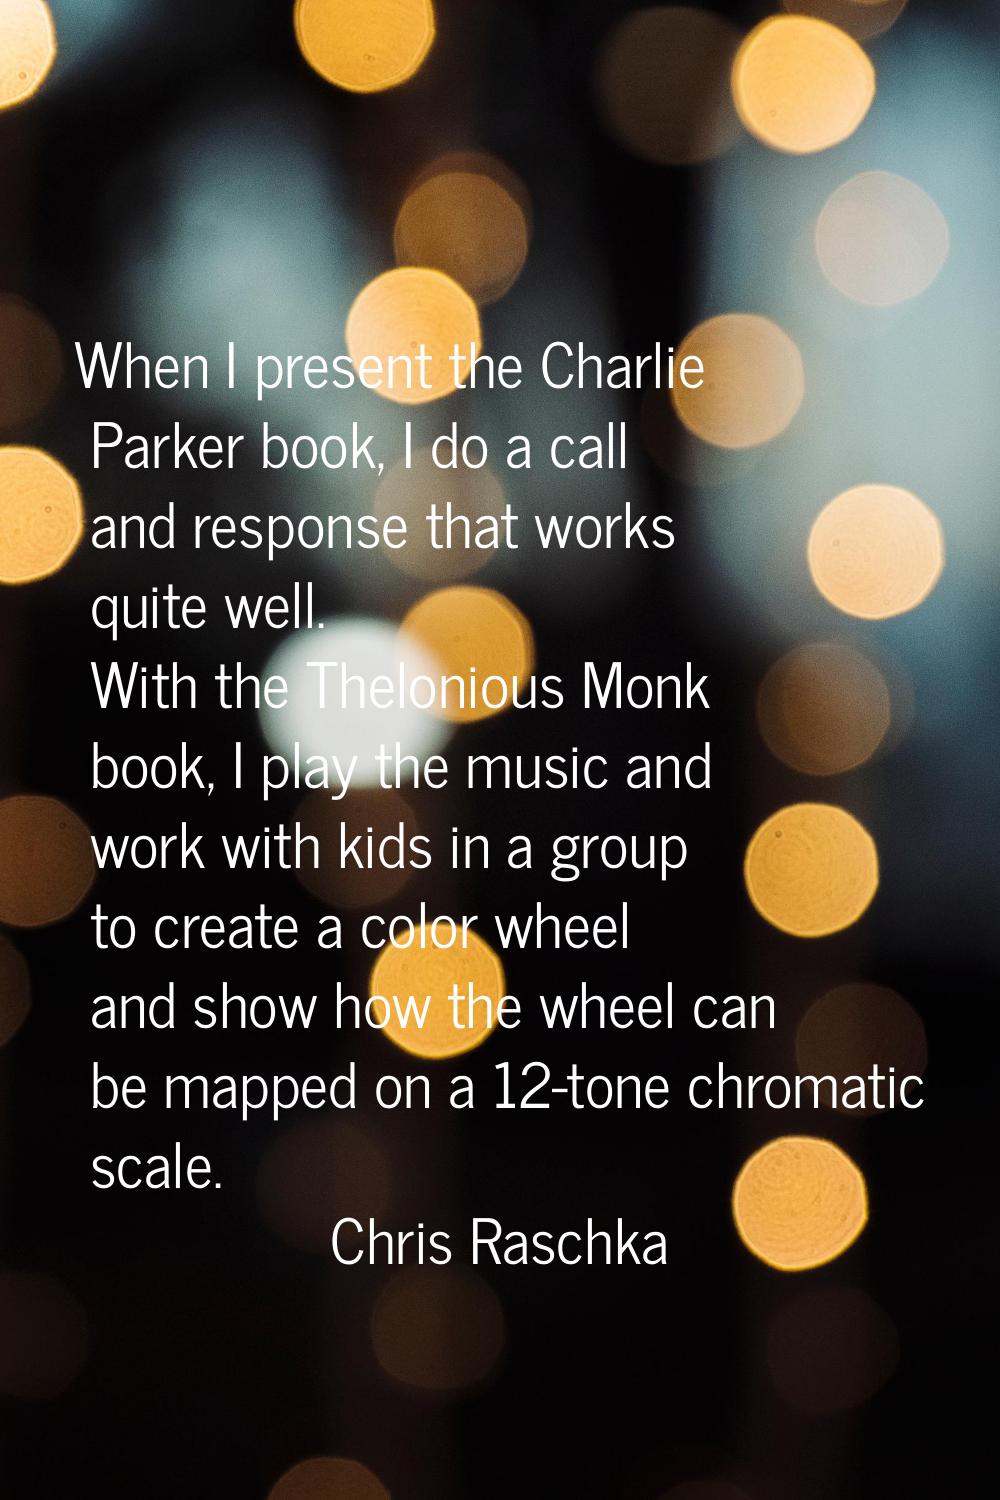 When I present the Charlie Parker book, I do a call and response that works quite well. With the Th